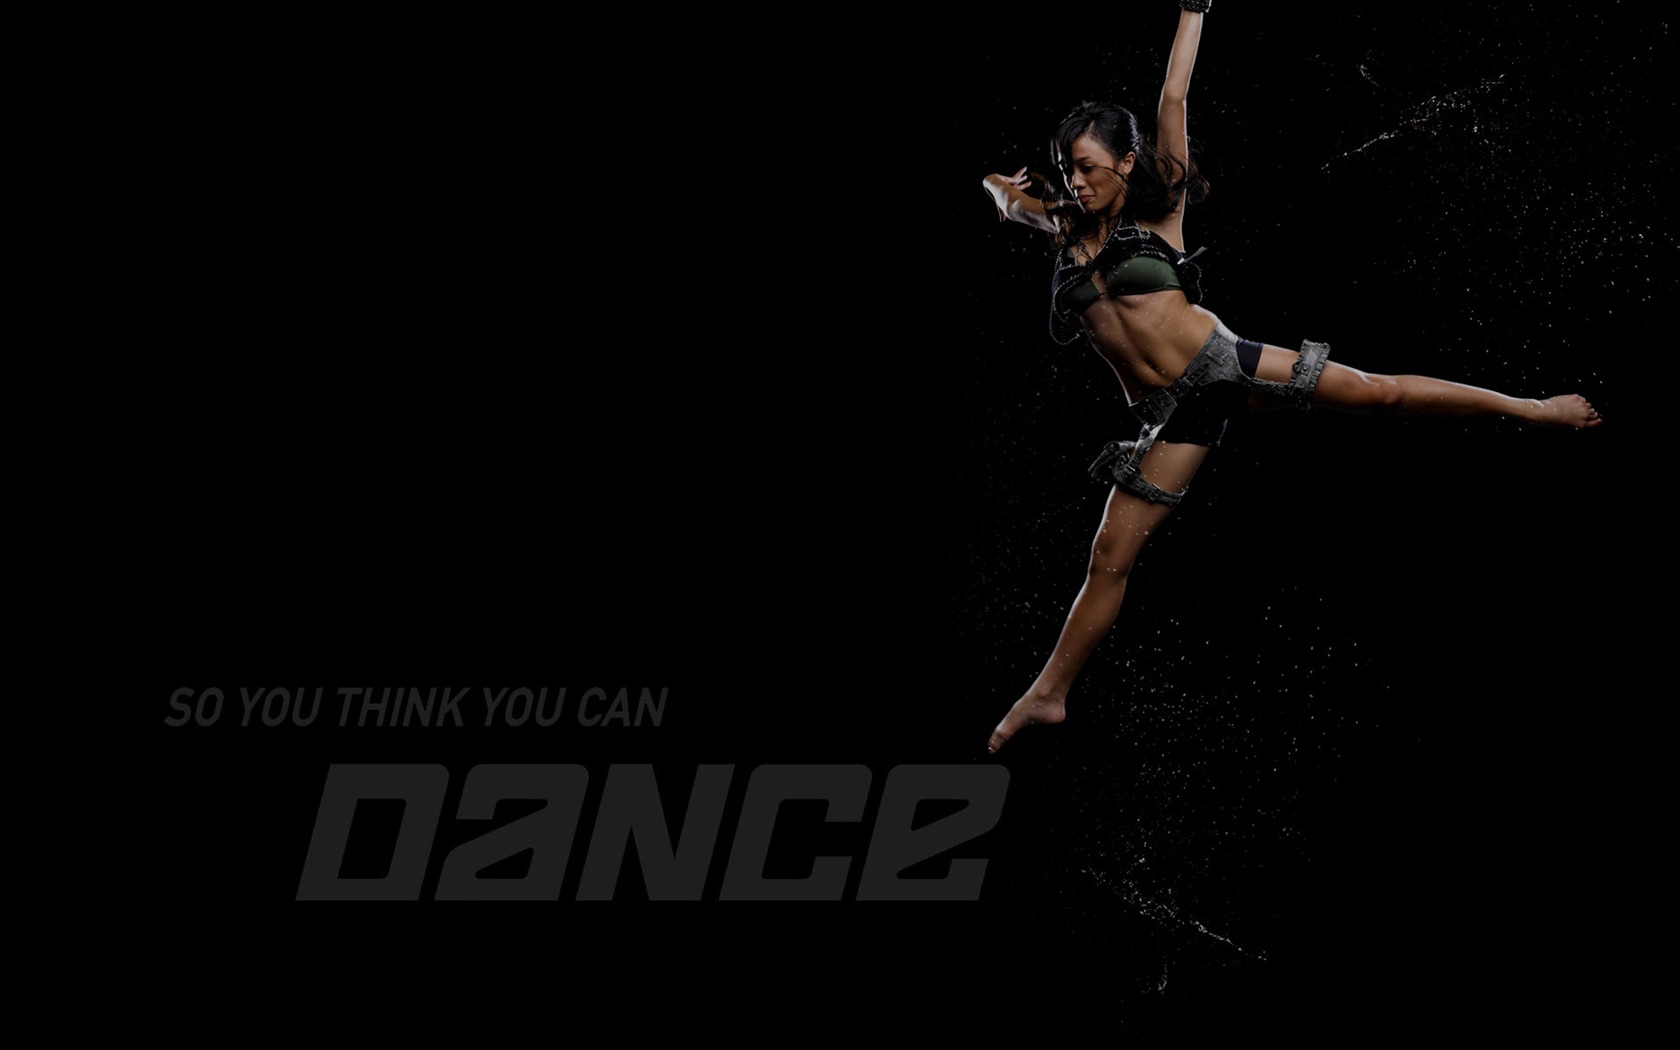 So You Think You Can Dance 舞林争霸 壁纸(二)3 - 1680x1050